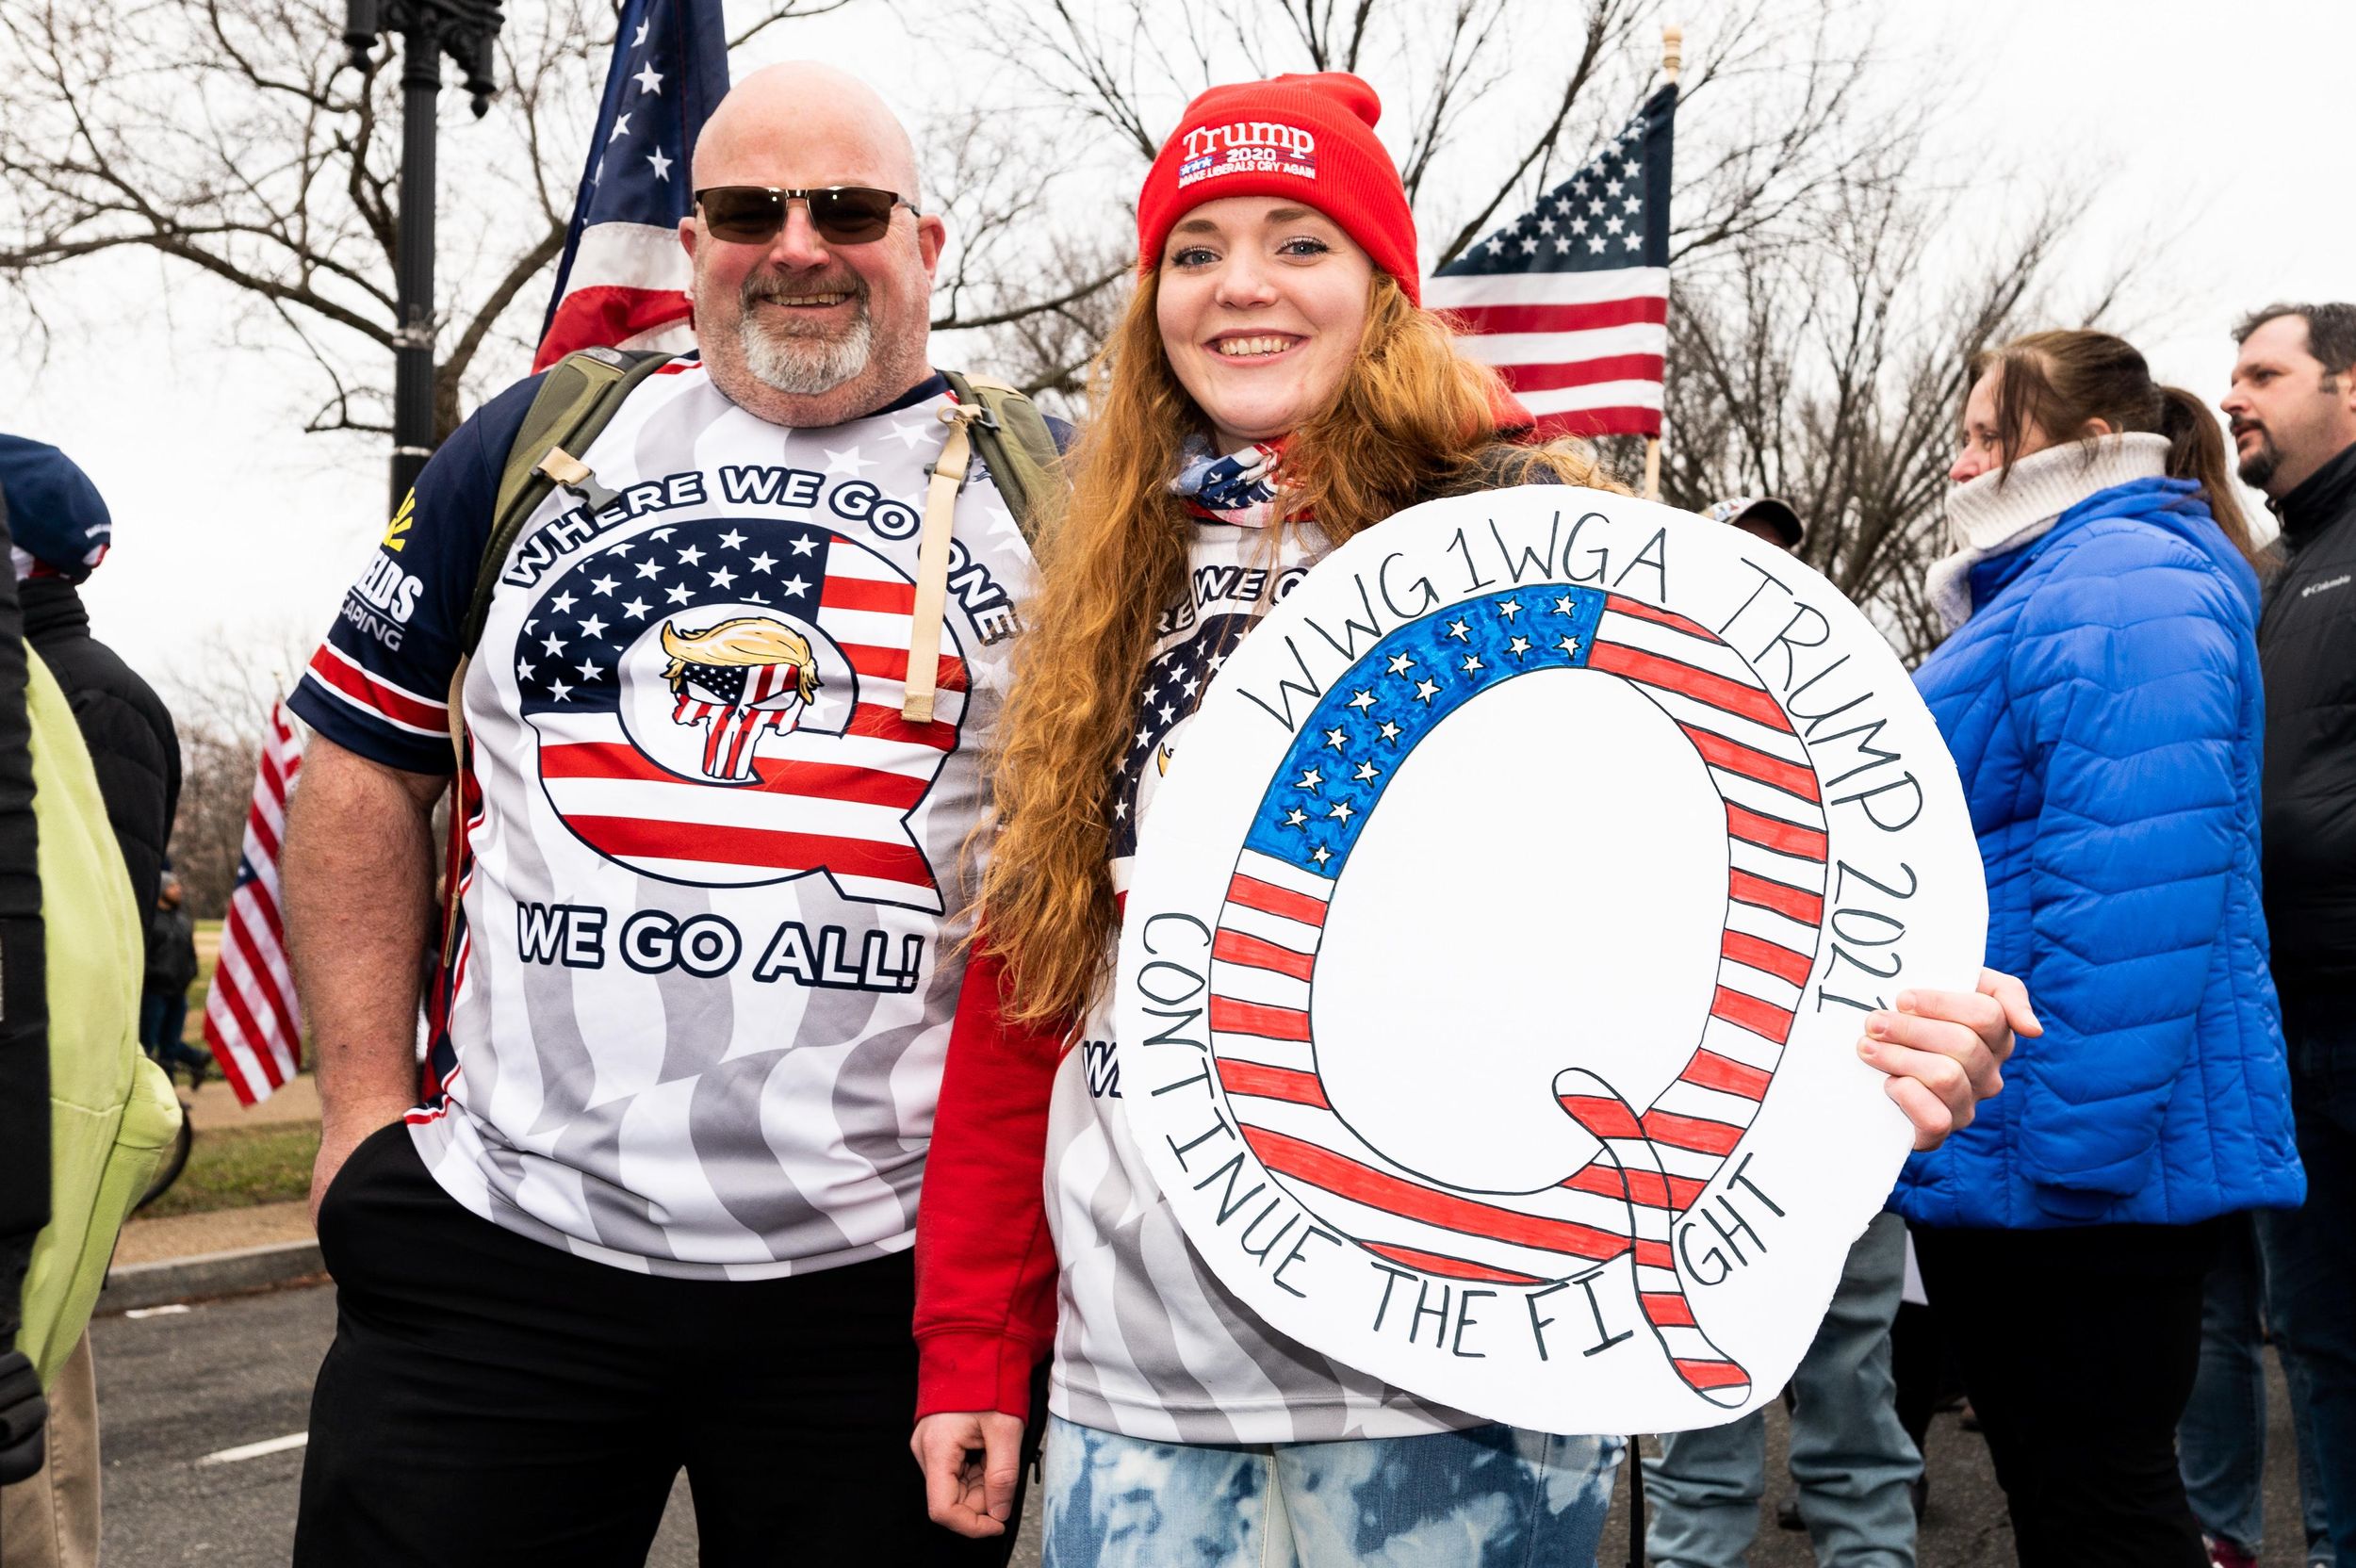 QAnon supporters attend a pro-Trump rally prior to the storming of the US Capitol building. Reuters